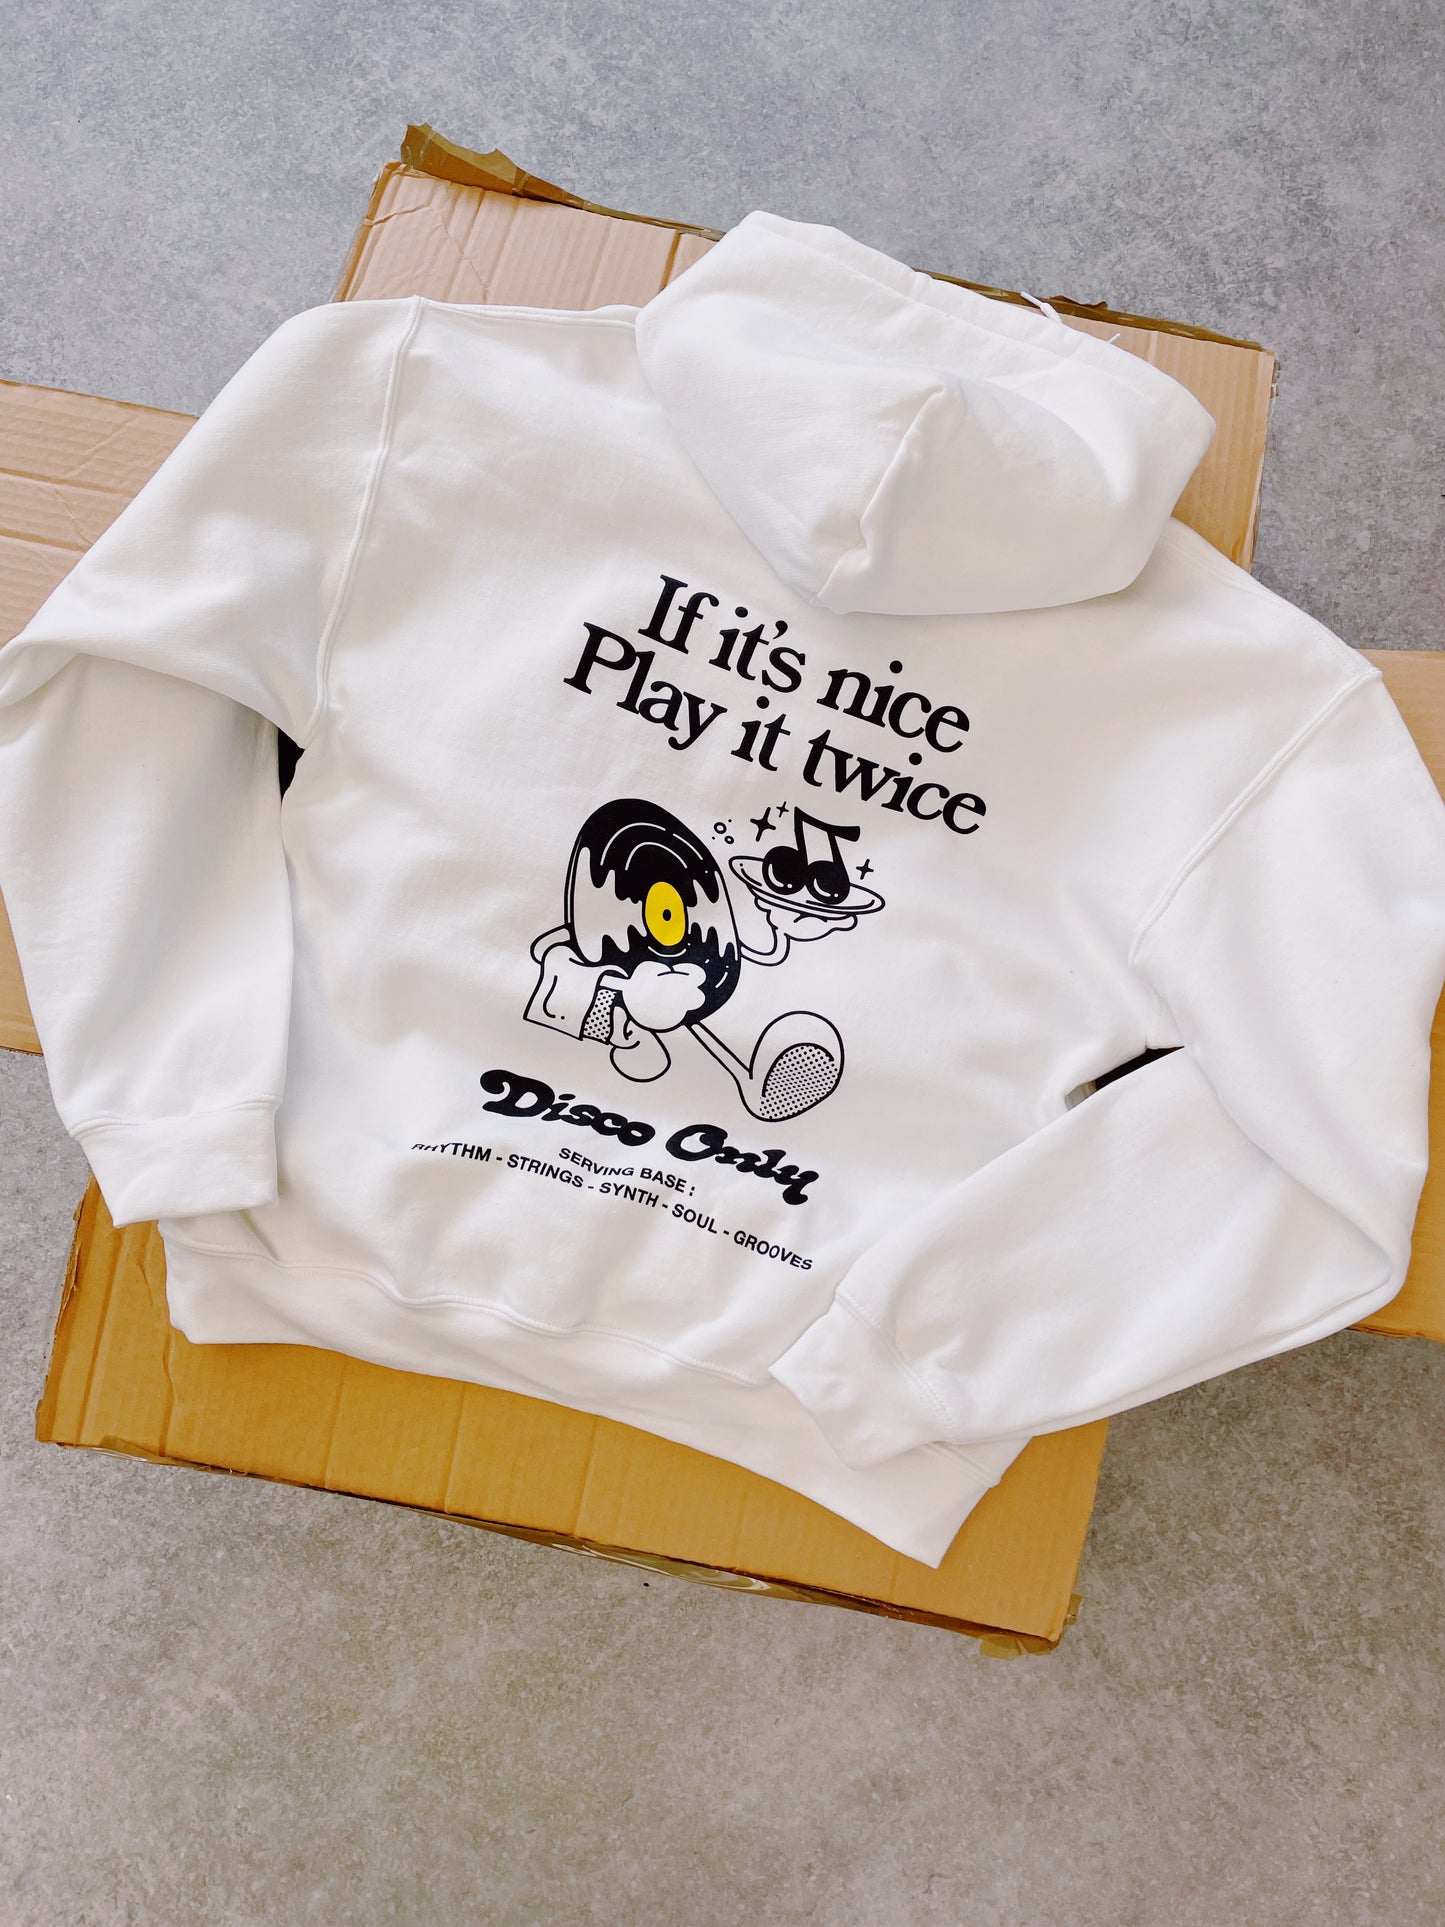 Load image into Gallery viewer, DISCO ONLY &amp;#39;Play It Twice V2&amp;#39; Hoodie - White
